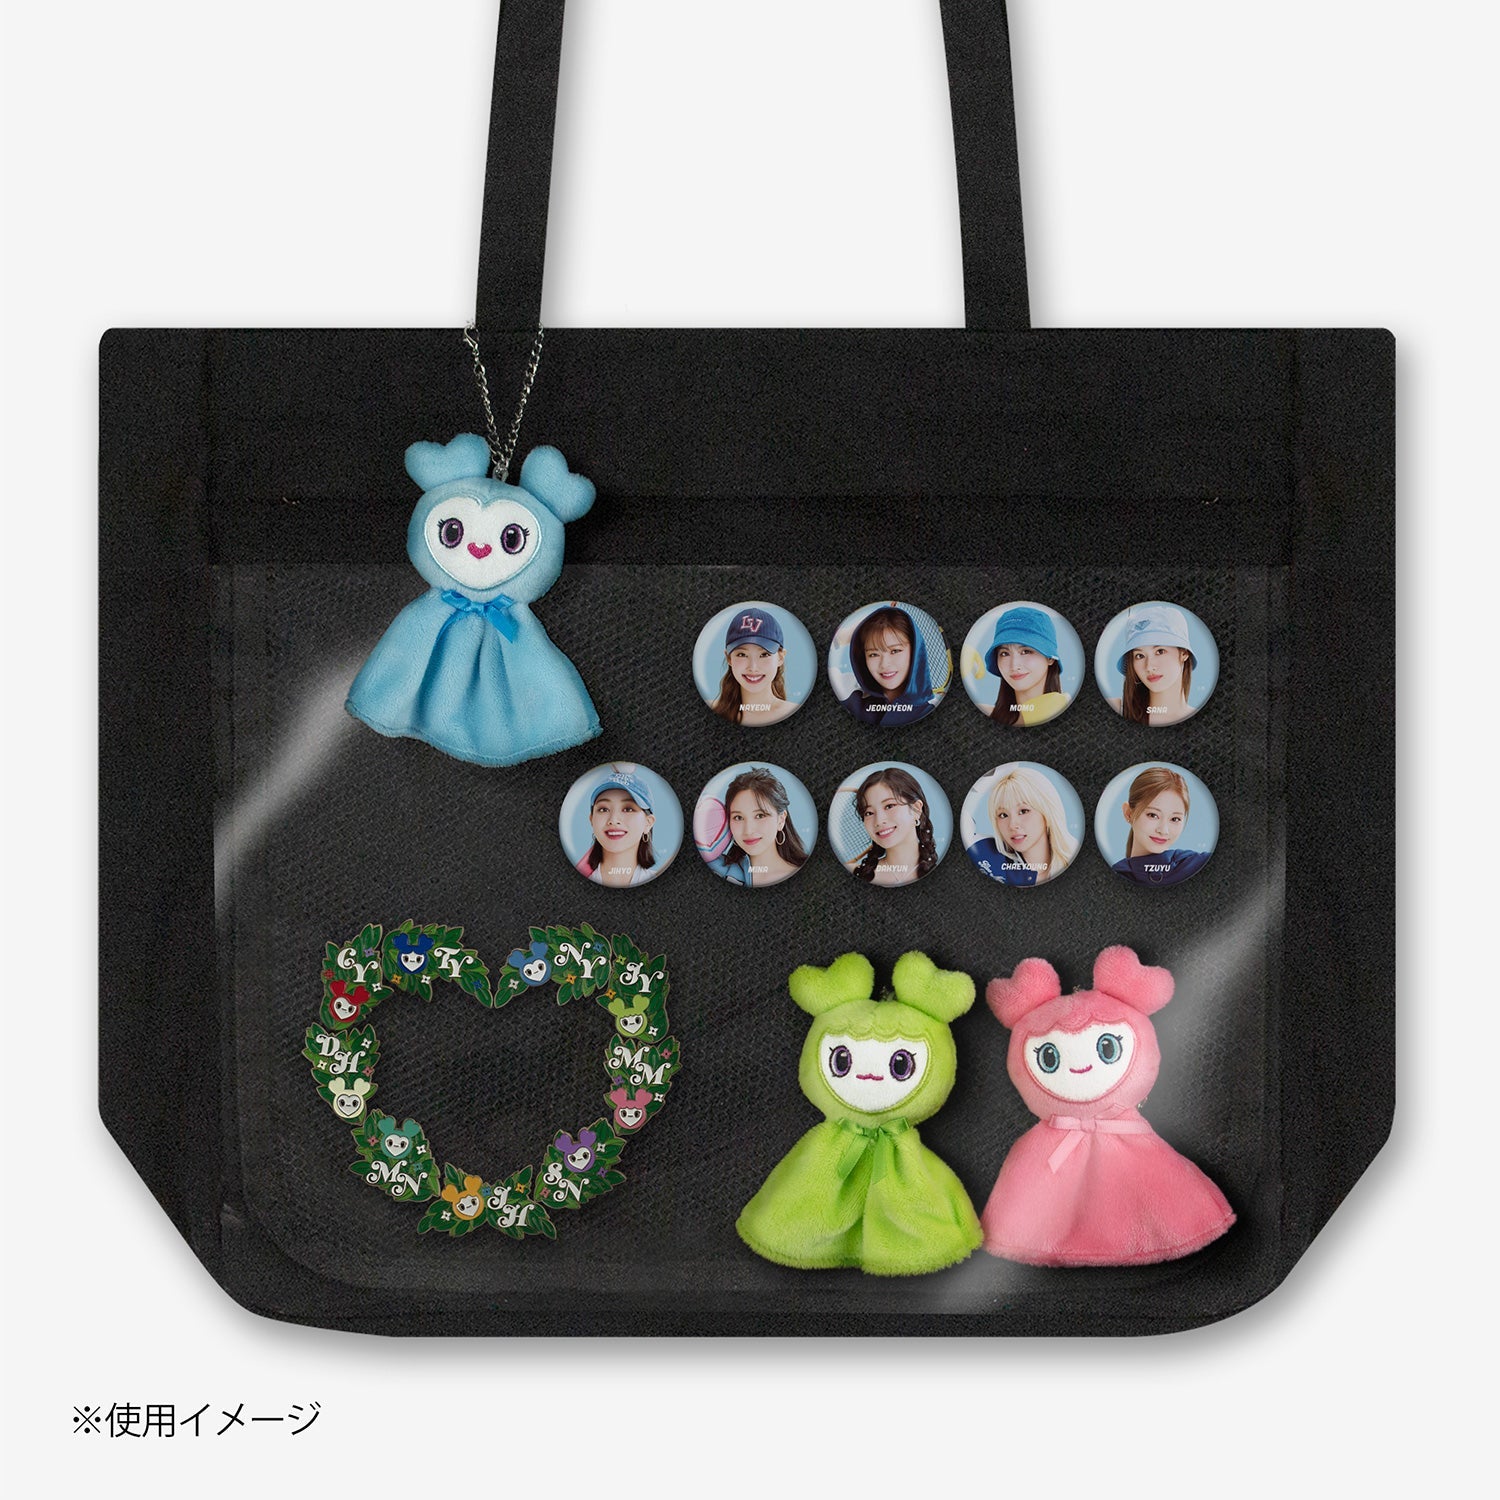 TOTE BAG Designed by TWICE / TWICE『READY TO BE』